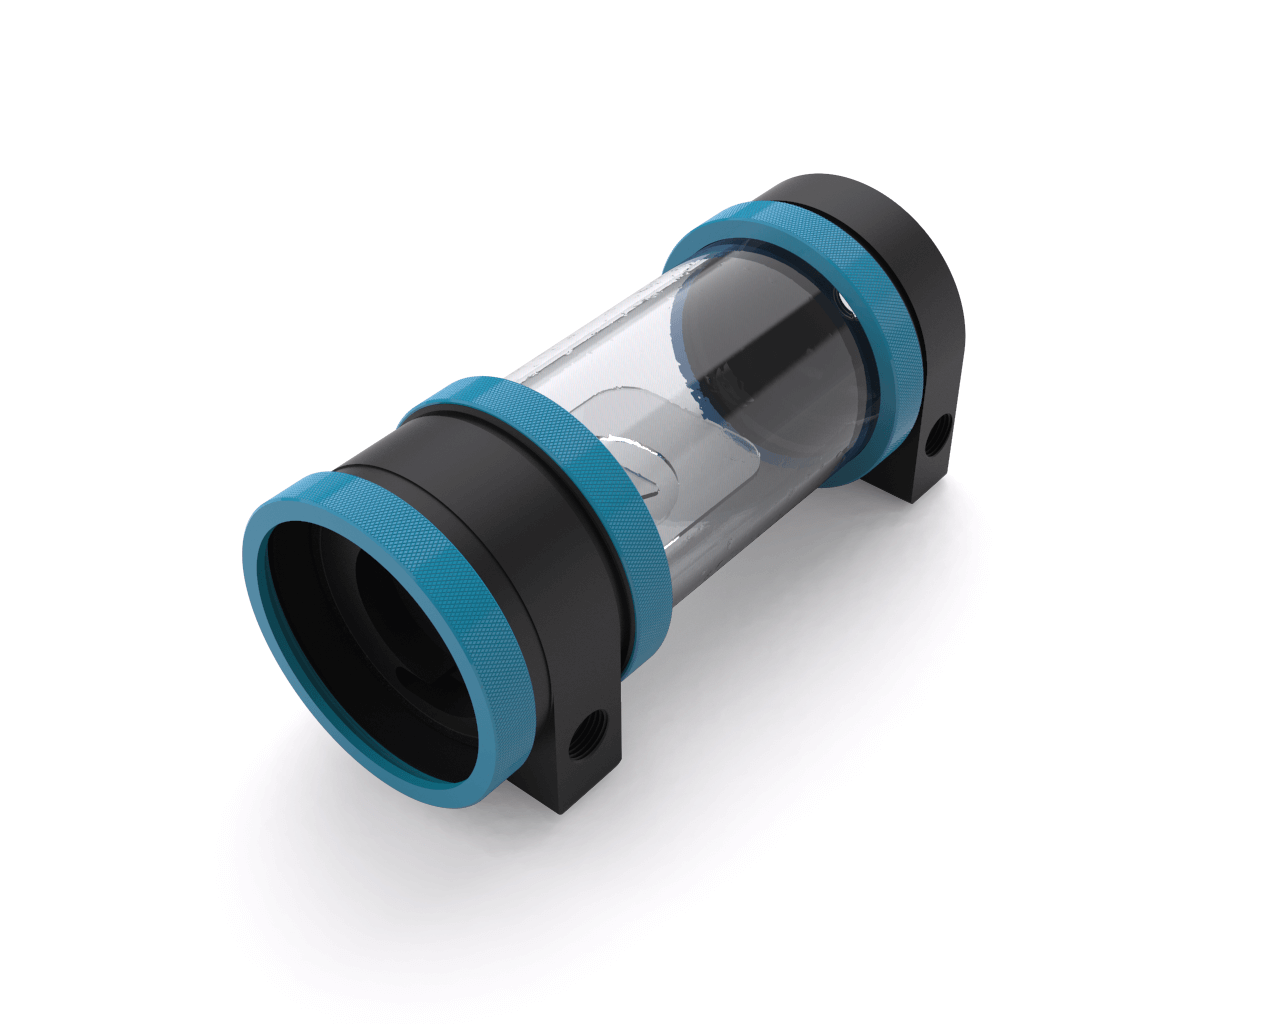 PrimoChill CTR Hard Mount Phase II High Flow D5 Enabled Reservoir - Black POM - 120mm - PrimoChill - KEEPING IT COOL Sky Blue